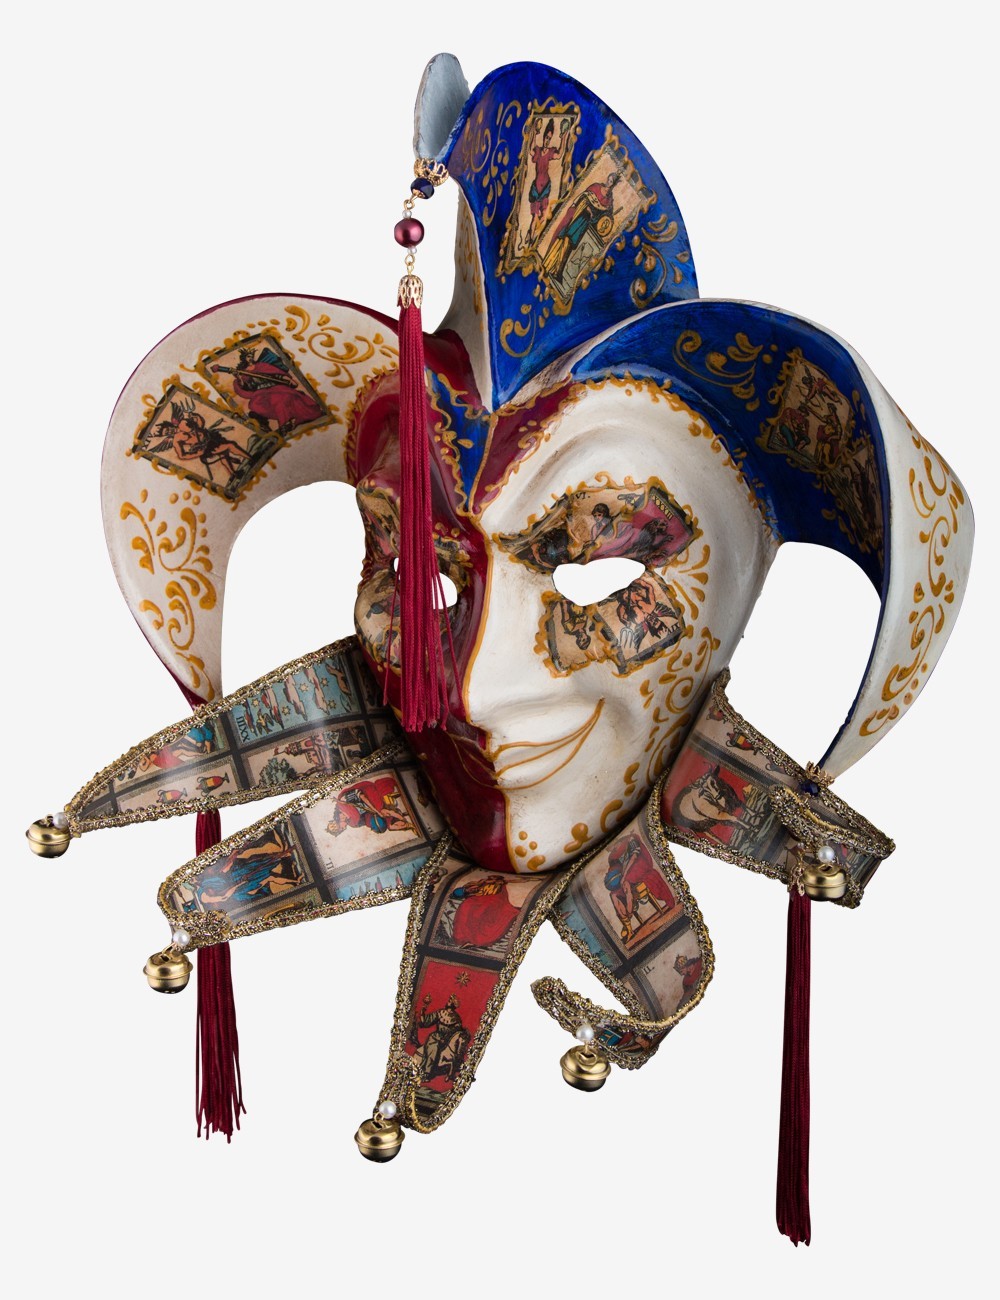 Court Jester Masquerade Mask - The Fool